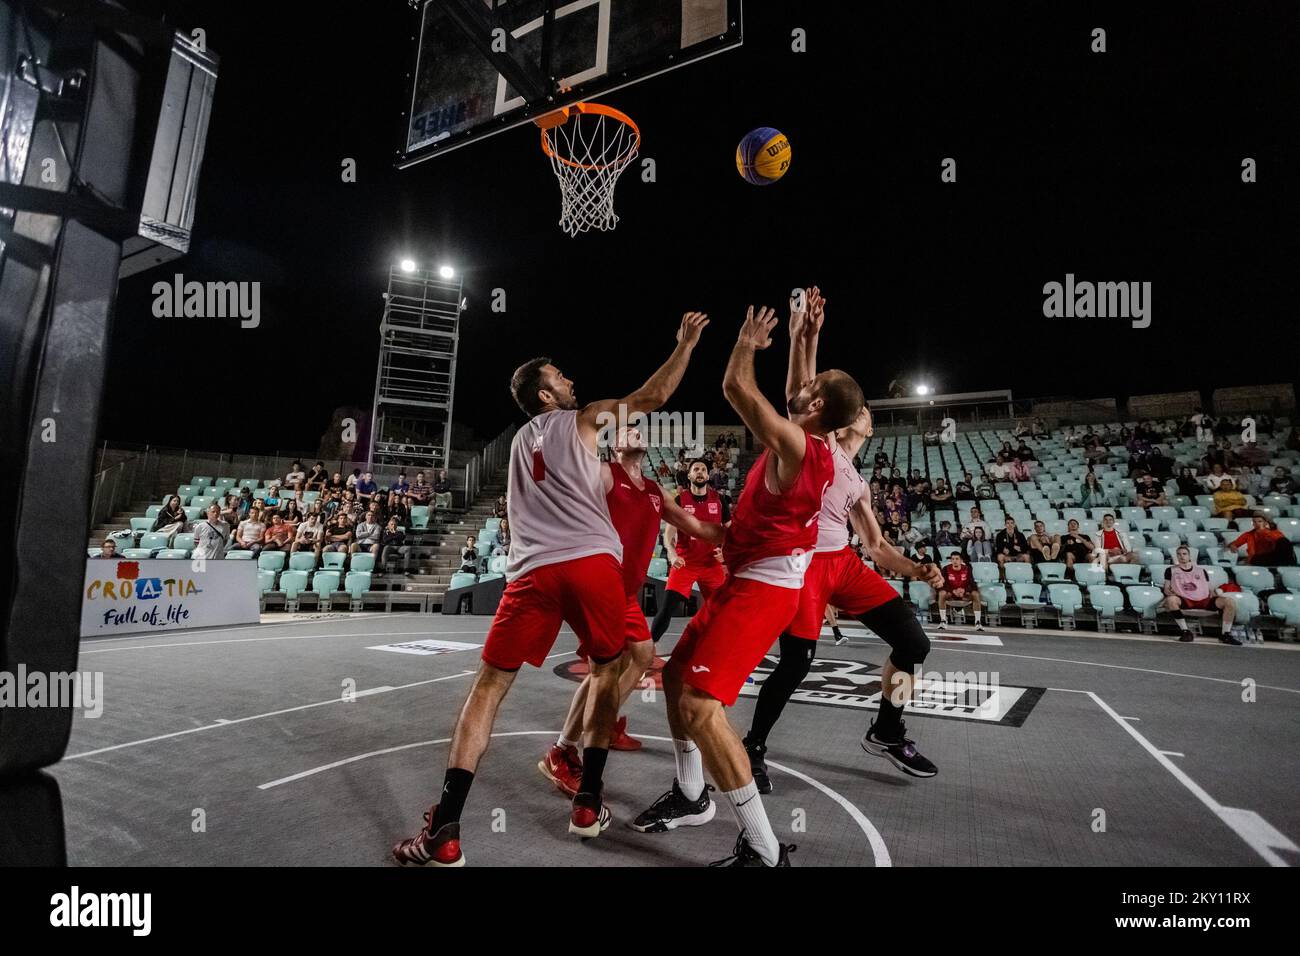 FIBA 3x3 Quest tournament held at St. Michael Fortress , in Sibenik, Croatia, on May 21, 2022. . PRO 3x3 Tour - Croatian Open championship in 3x3 basketball, which held from 13.05.2022 to 10.09.2022 has FIBA QUEST status, and the winner of Tour Final event in Pula will travel to Paris, France where he will qualify for Qualifying Draw of World Tour.All tournaments, that are played in various attractive locations all trough Croatia in organization by Energy Basket d.o.o., Pro 3x3 Association and Croatian Basketball Federation, have international character. Photo:  Stock Photo